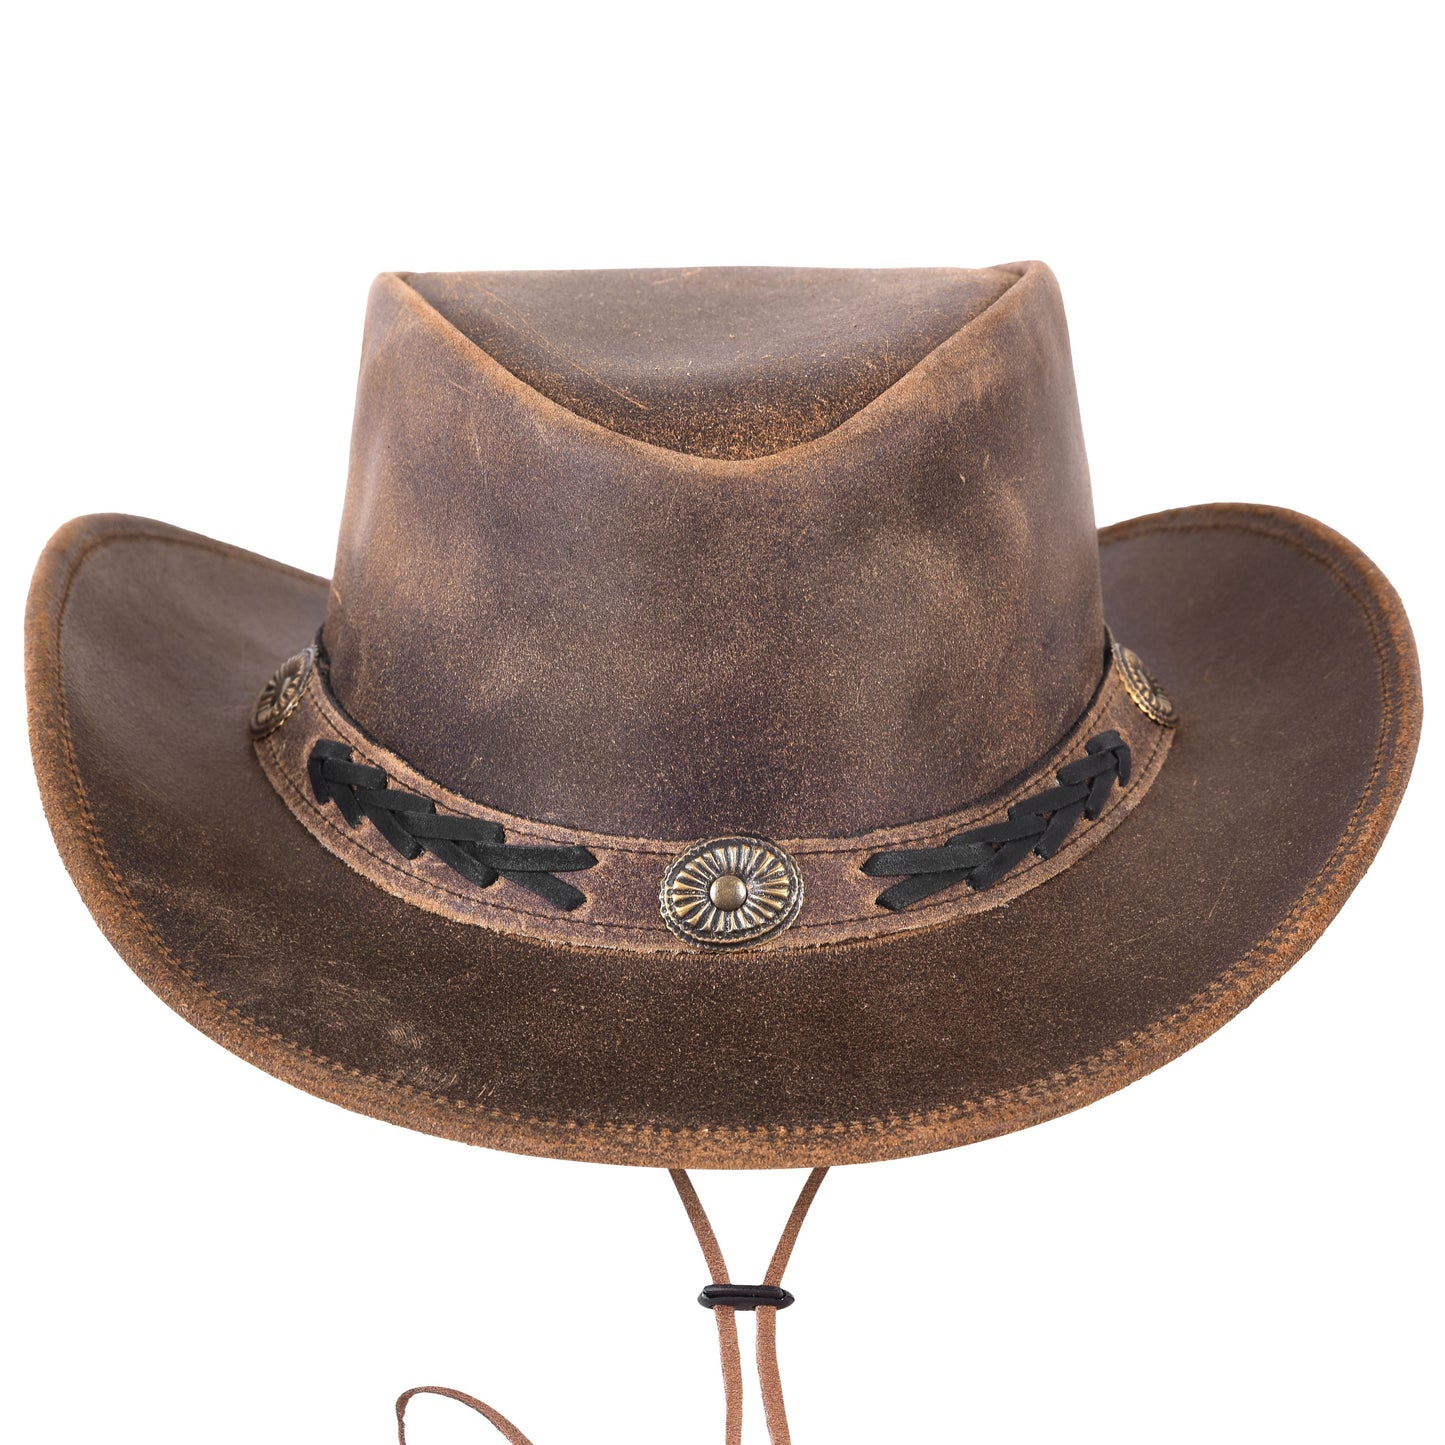 Vintage Leather Cowboy Hat Distressed Style with Braided Hat Band